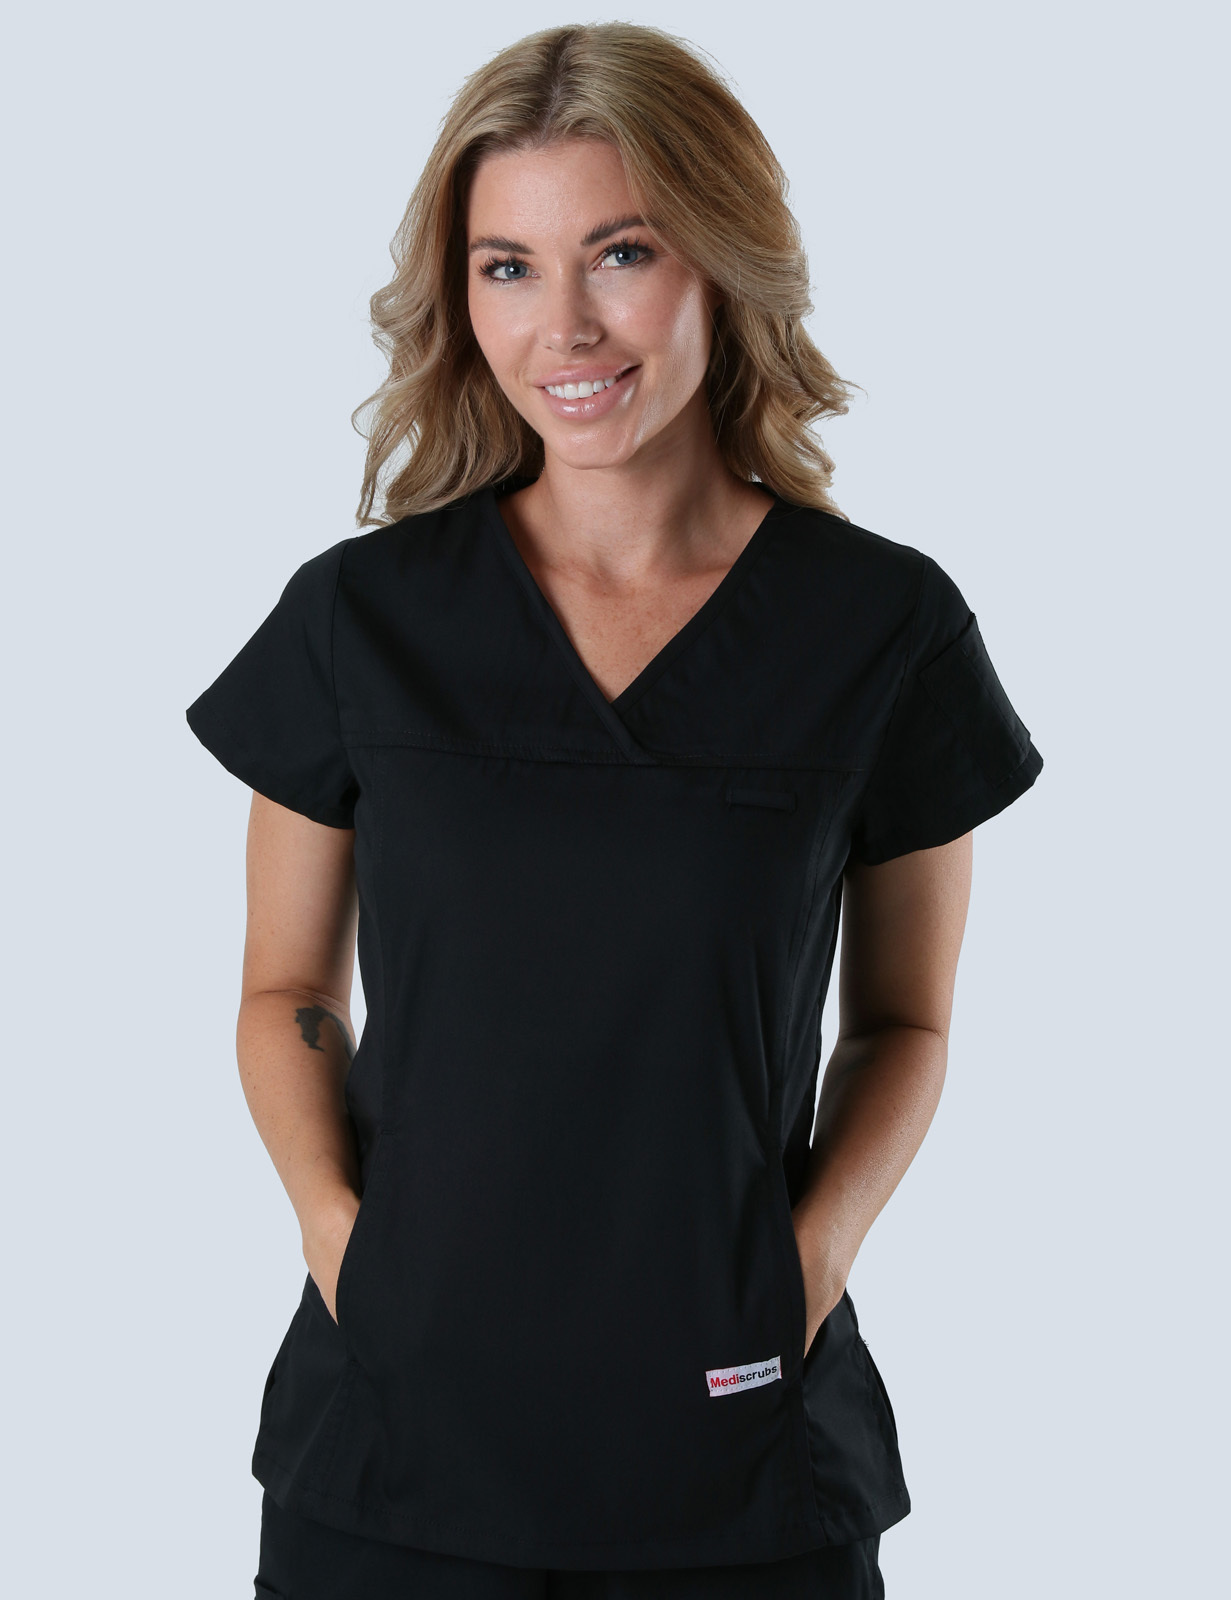 Toowoomba - ED Doctor (Women's Fit Solid Scrub Top and Cargo Pants in Navy incl Logos)